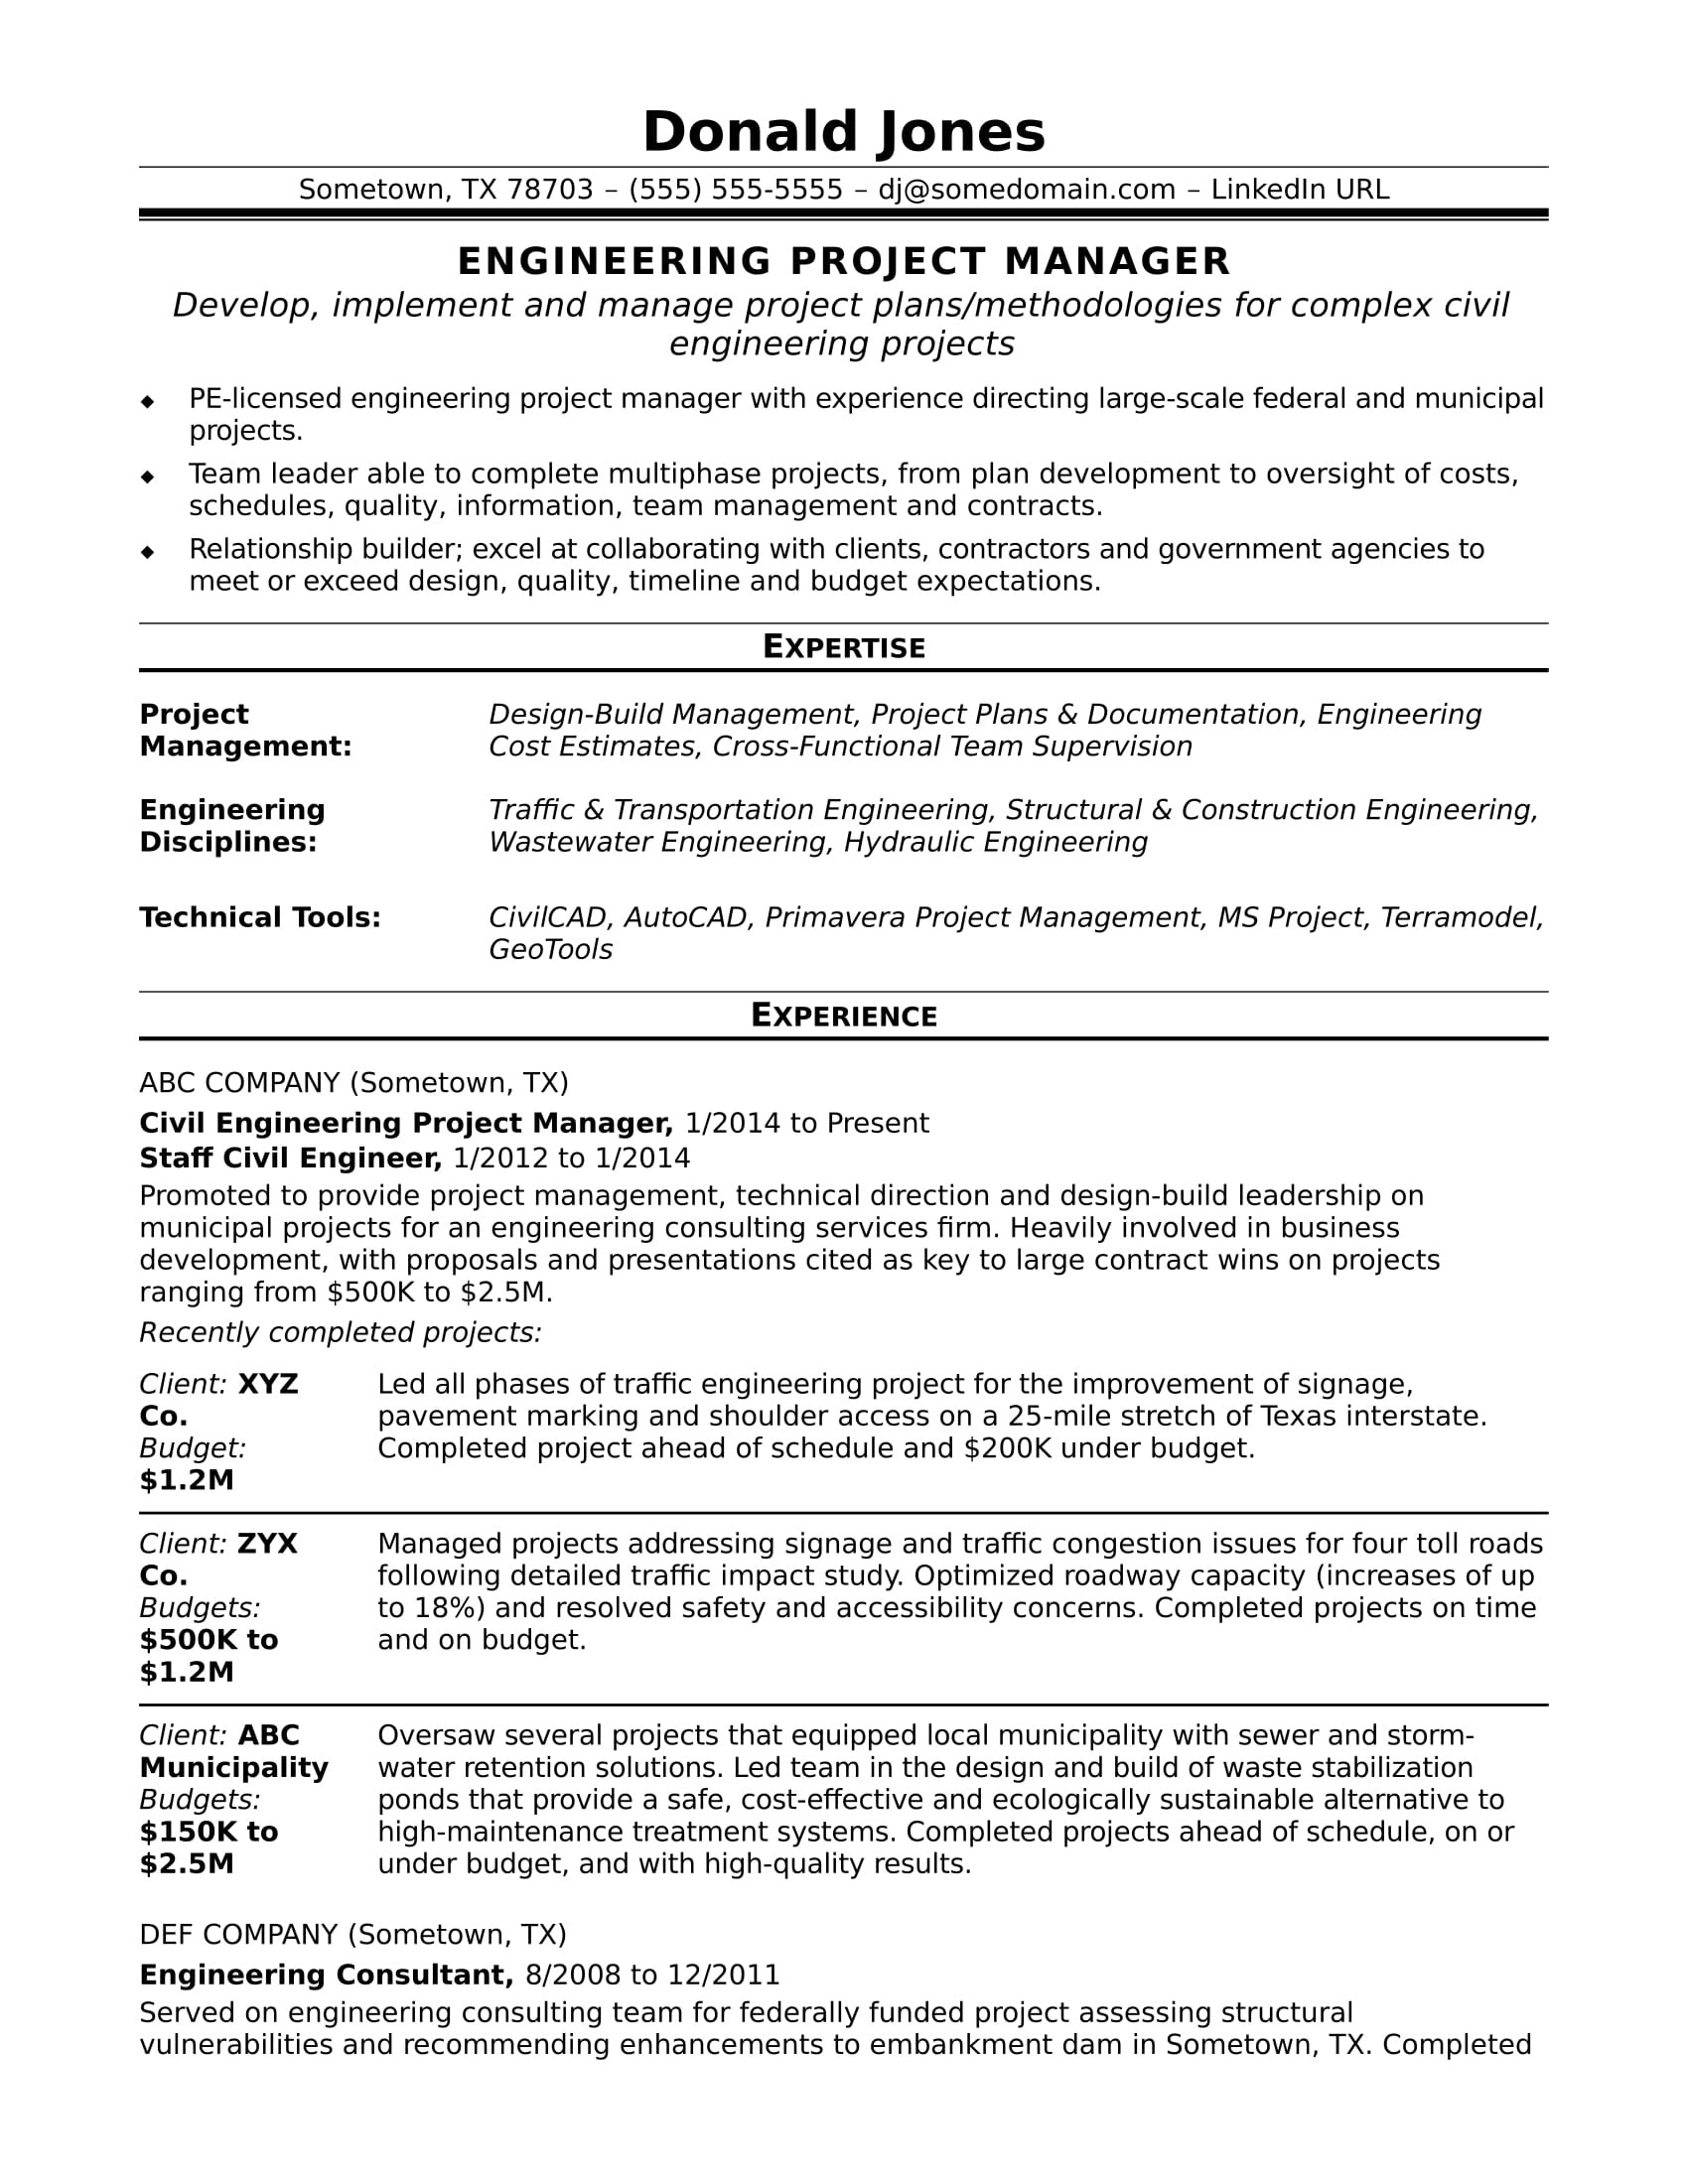 Civil Engineering Project Manager Resume Sample Sample Resume for A Midlevel Engineering Project Manager